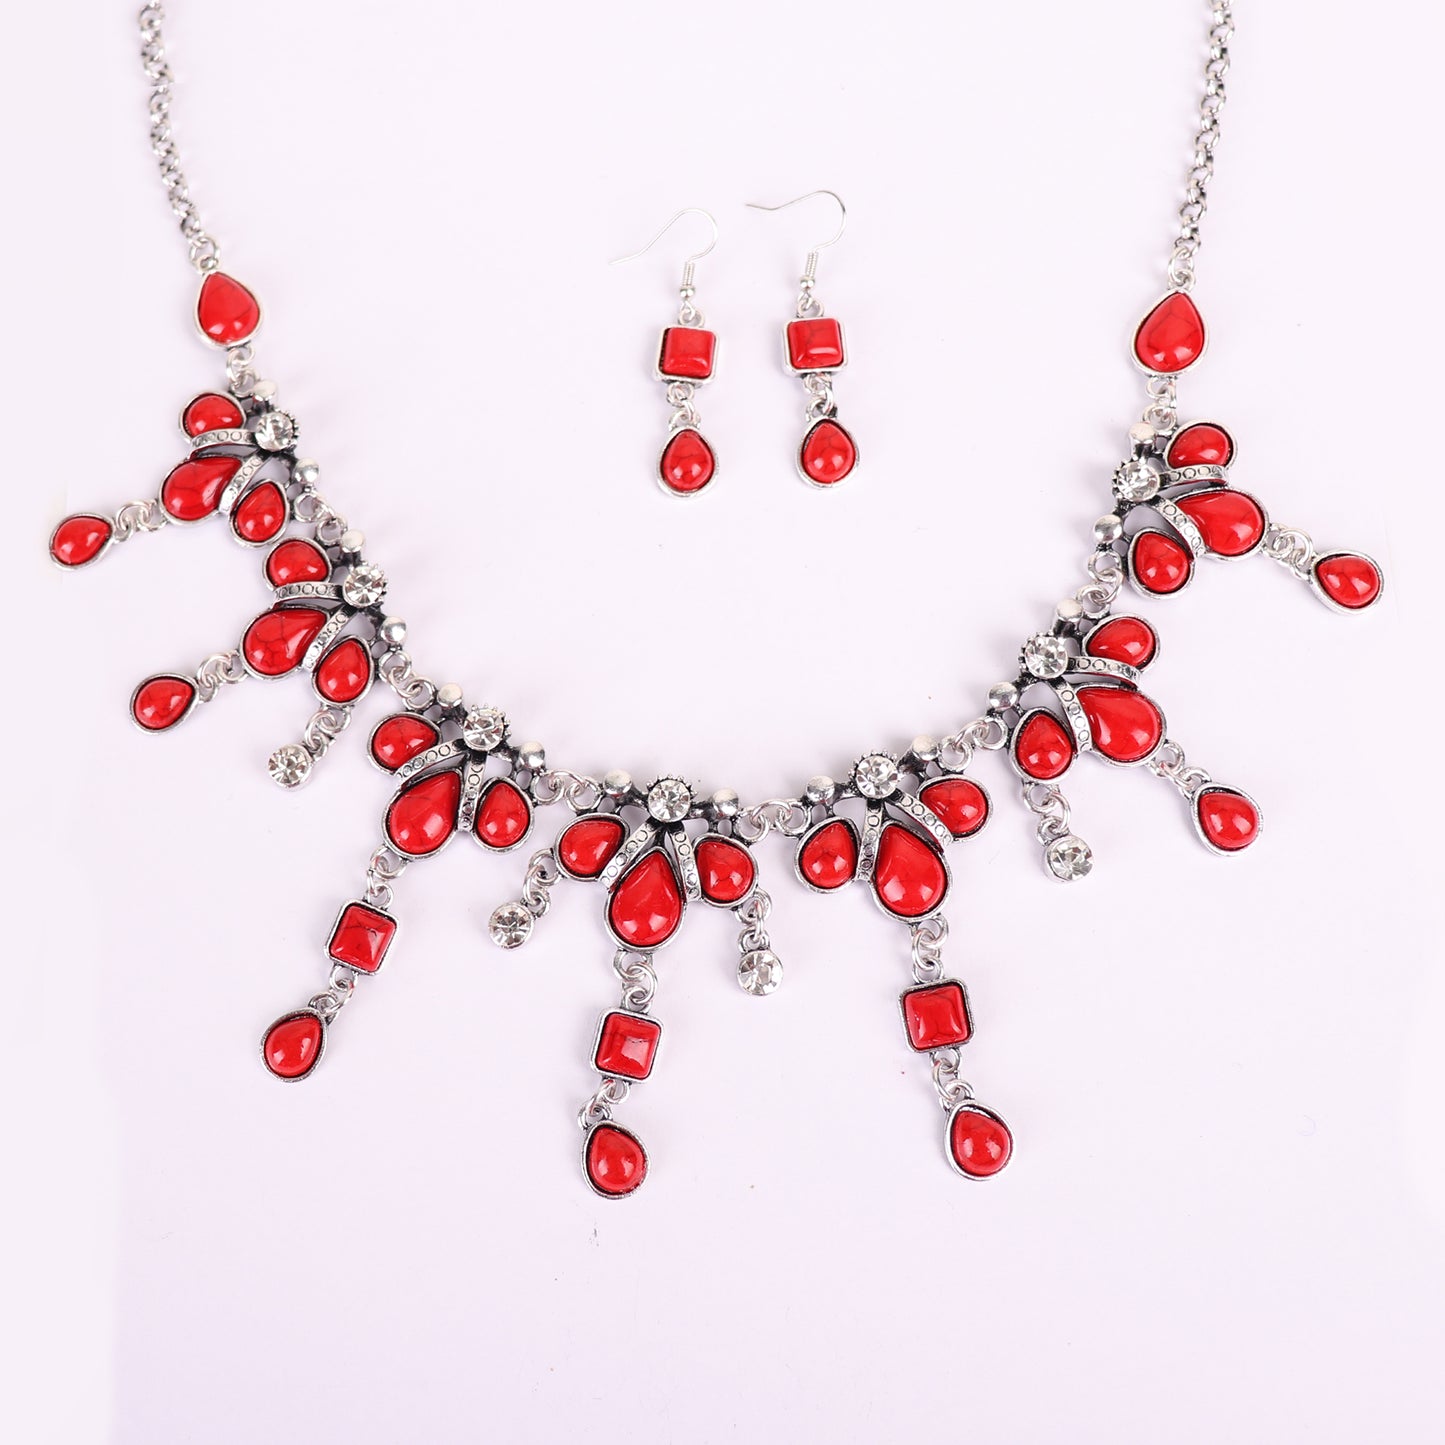 Necklace Set,Queen of Greece Necklace Set in Red - Cippele Multi Store